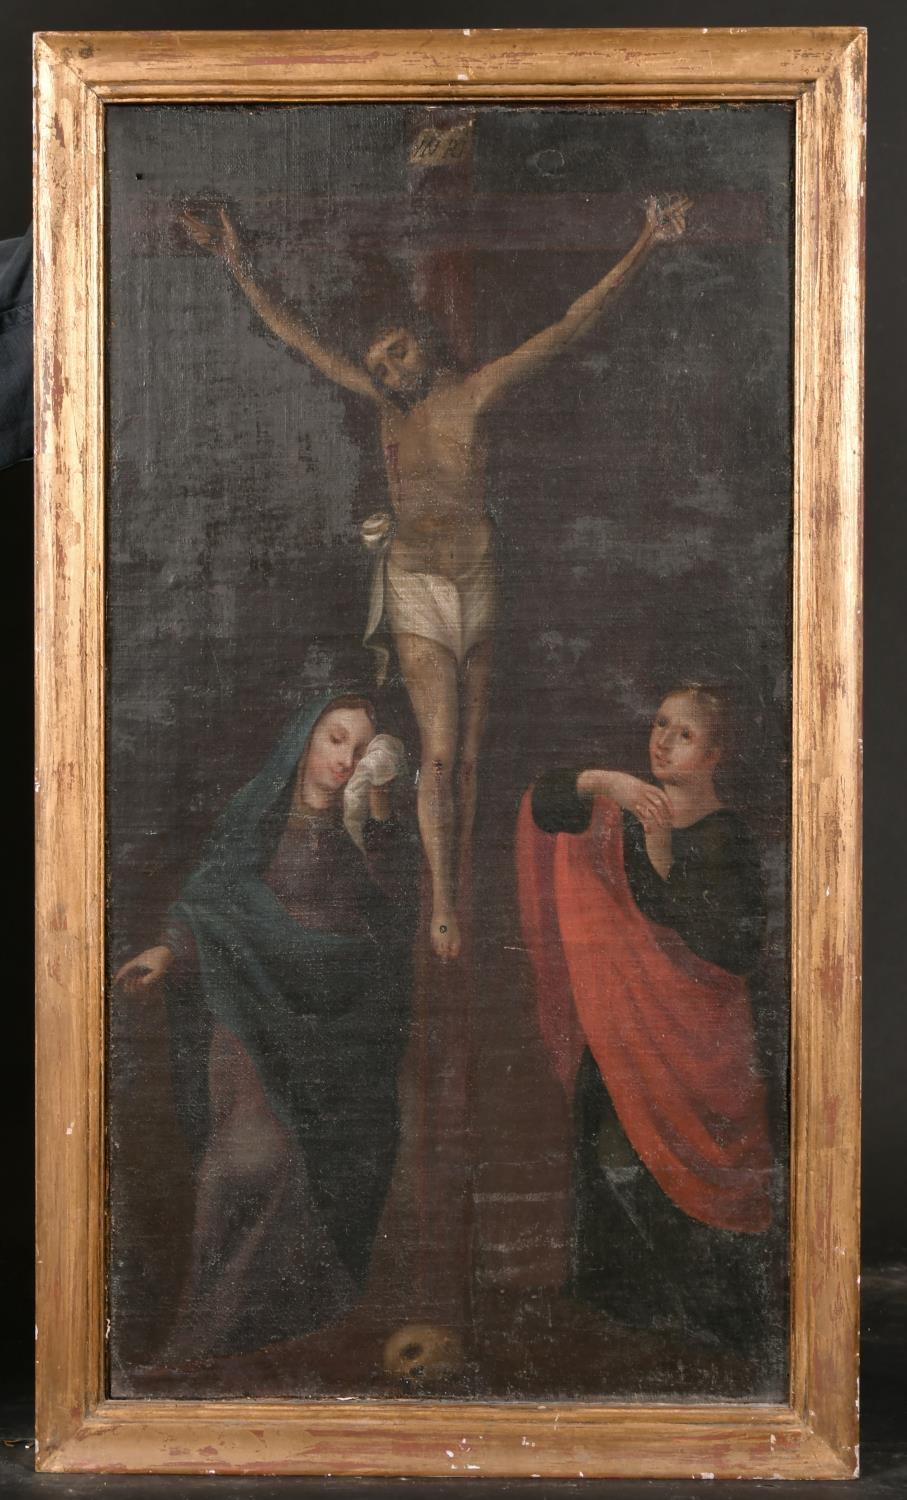 18th CENTURY ITALIAN OLD MASTER OIL ON CANVAS - THE CRUCIFIXION CHRIST ON CROSS - Painting by Italian 18th